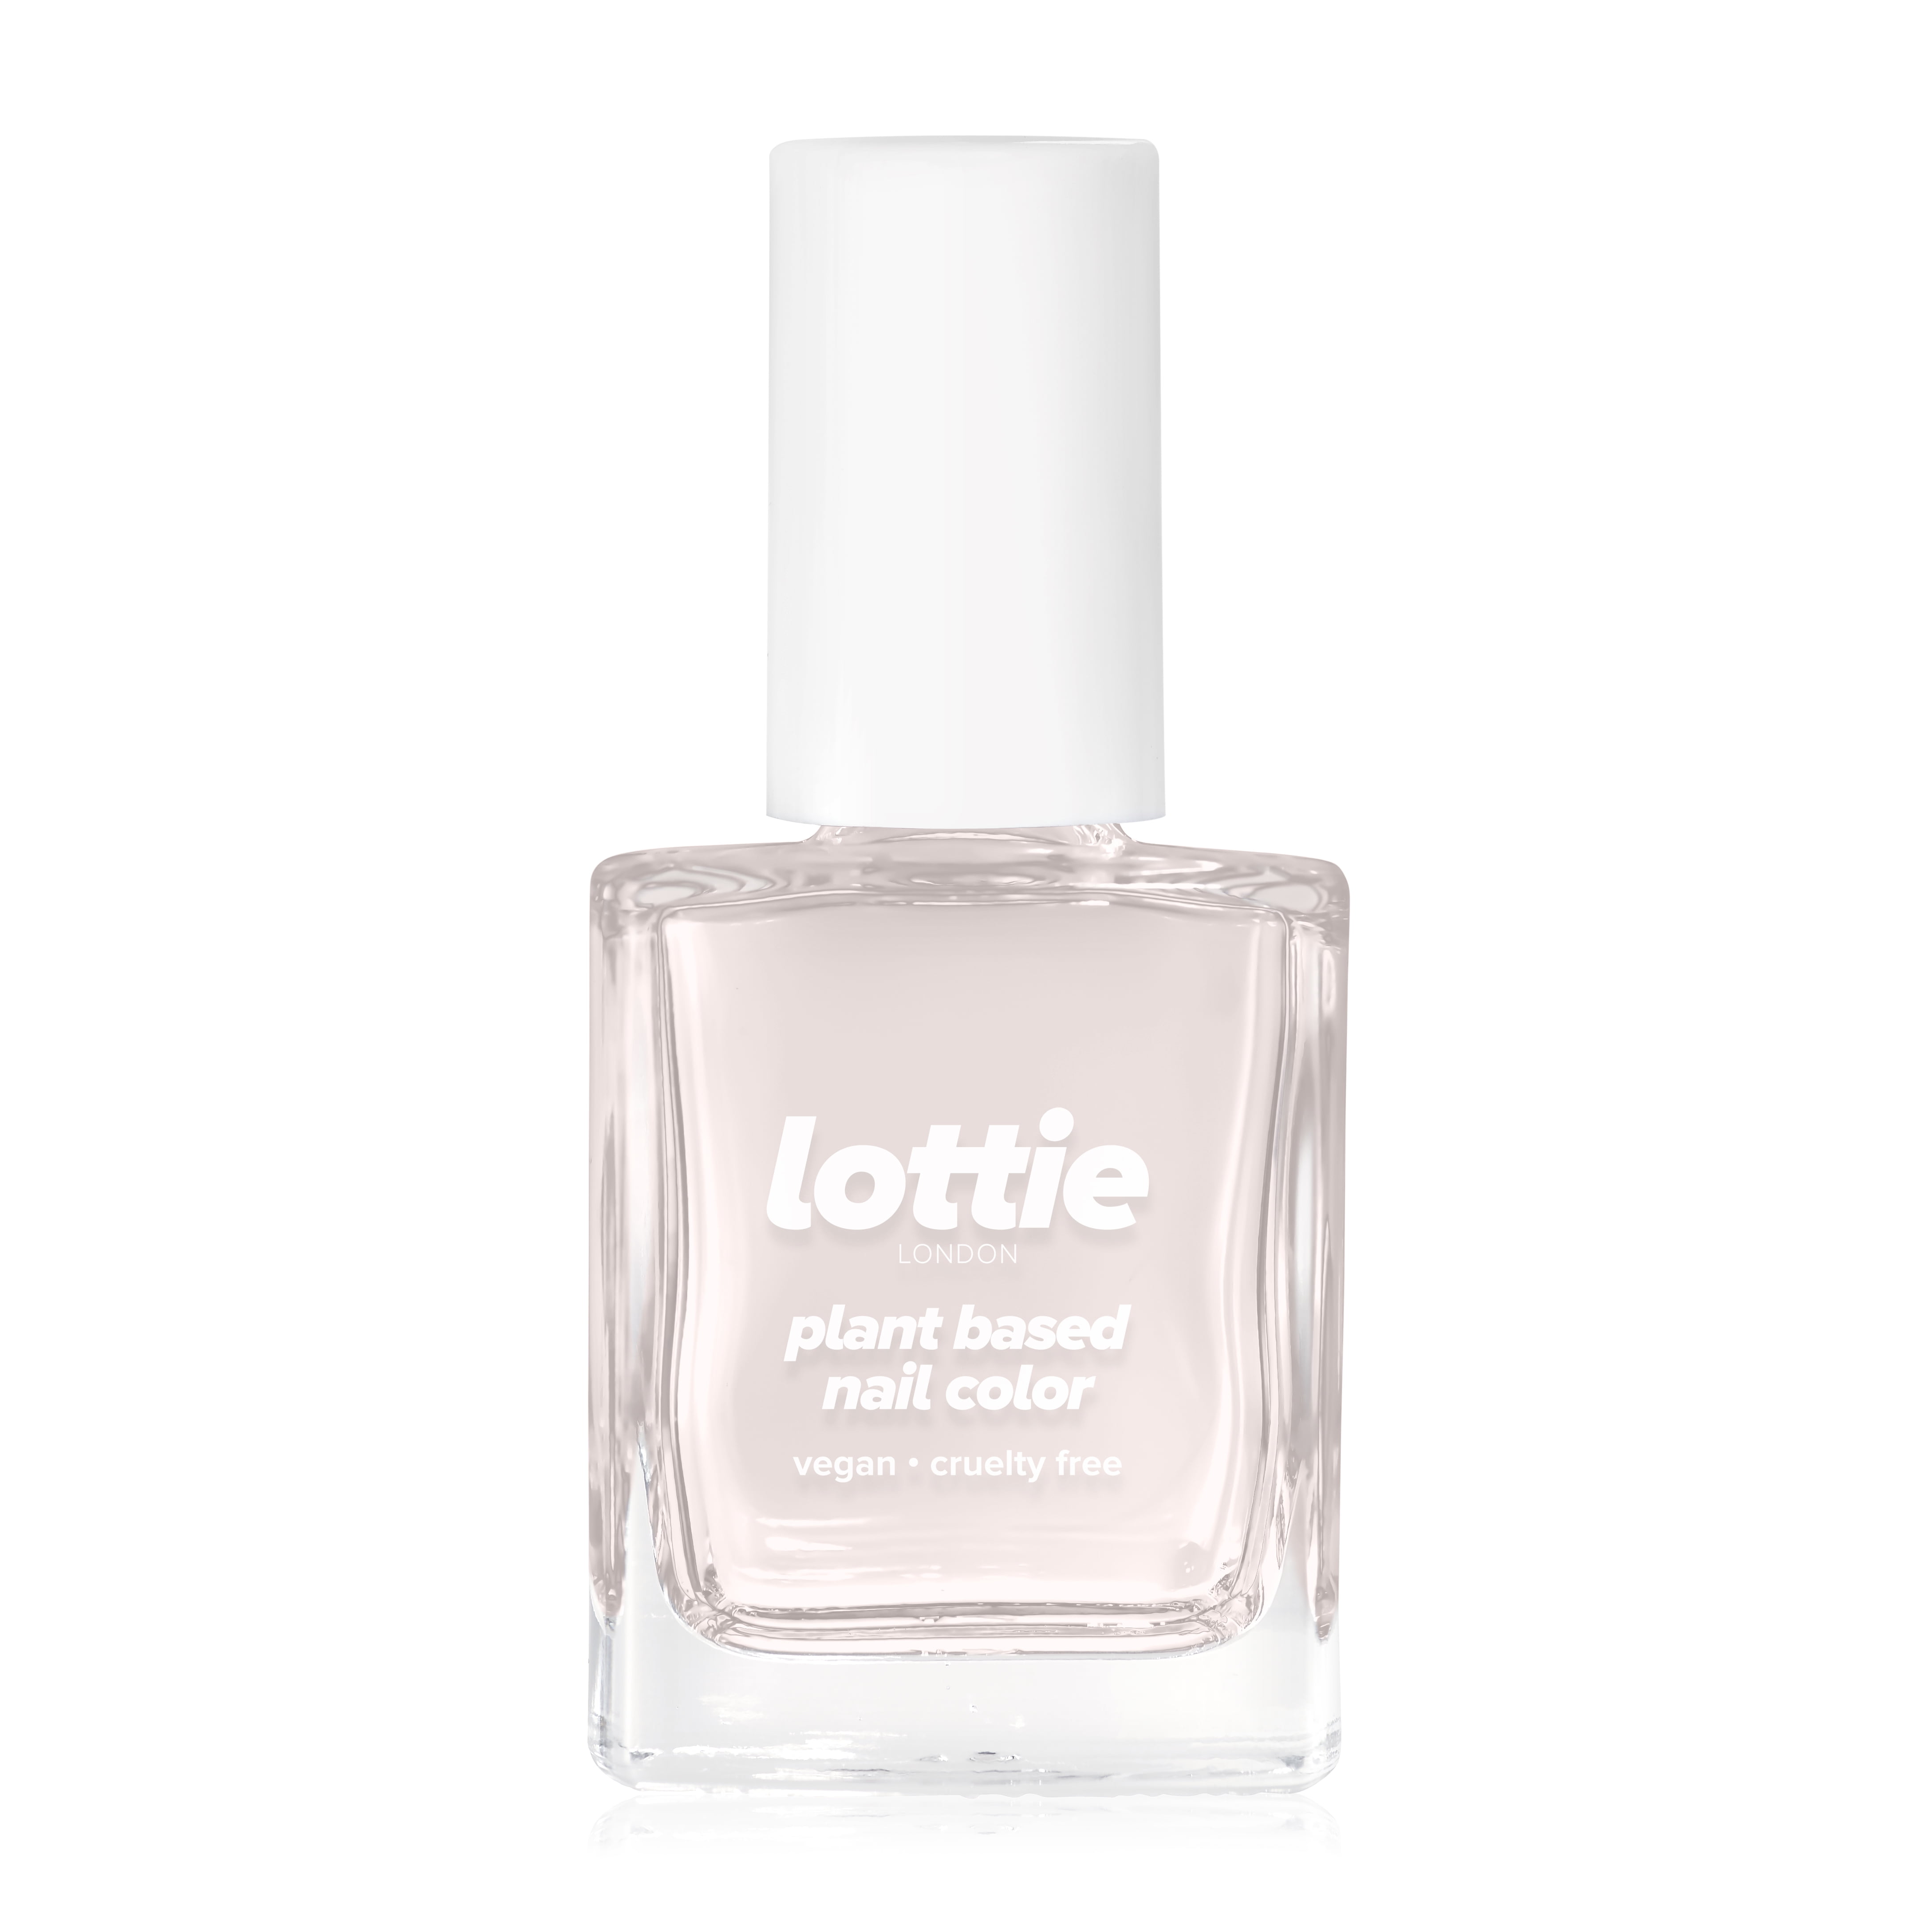 Lottie London Plant based Gel Nail color, All Free, the best baby pink, Snatched, 0.33 fl oz